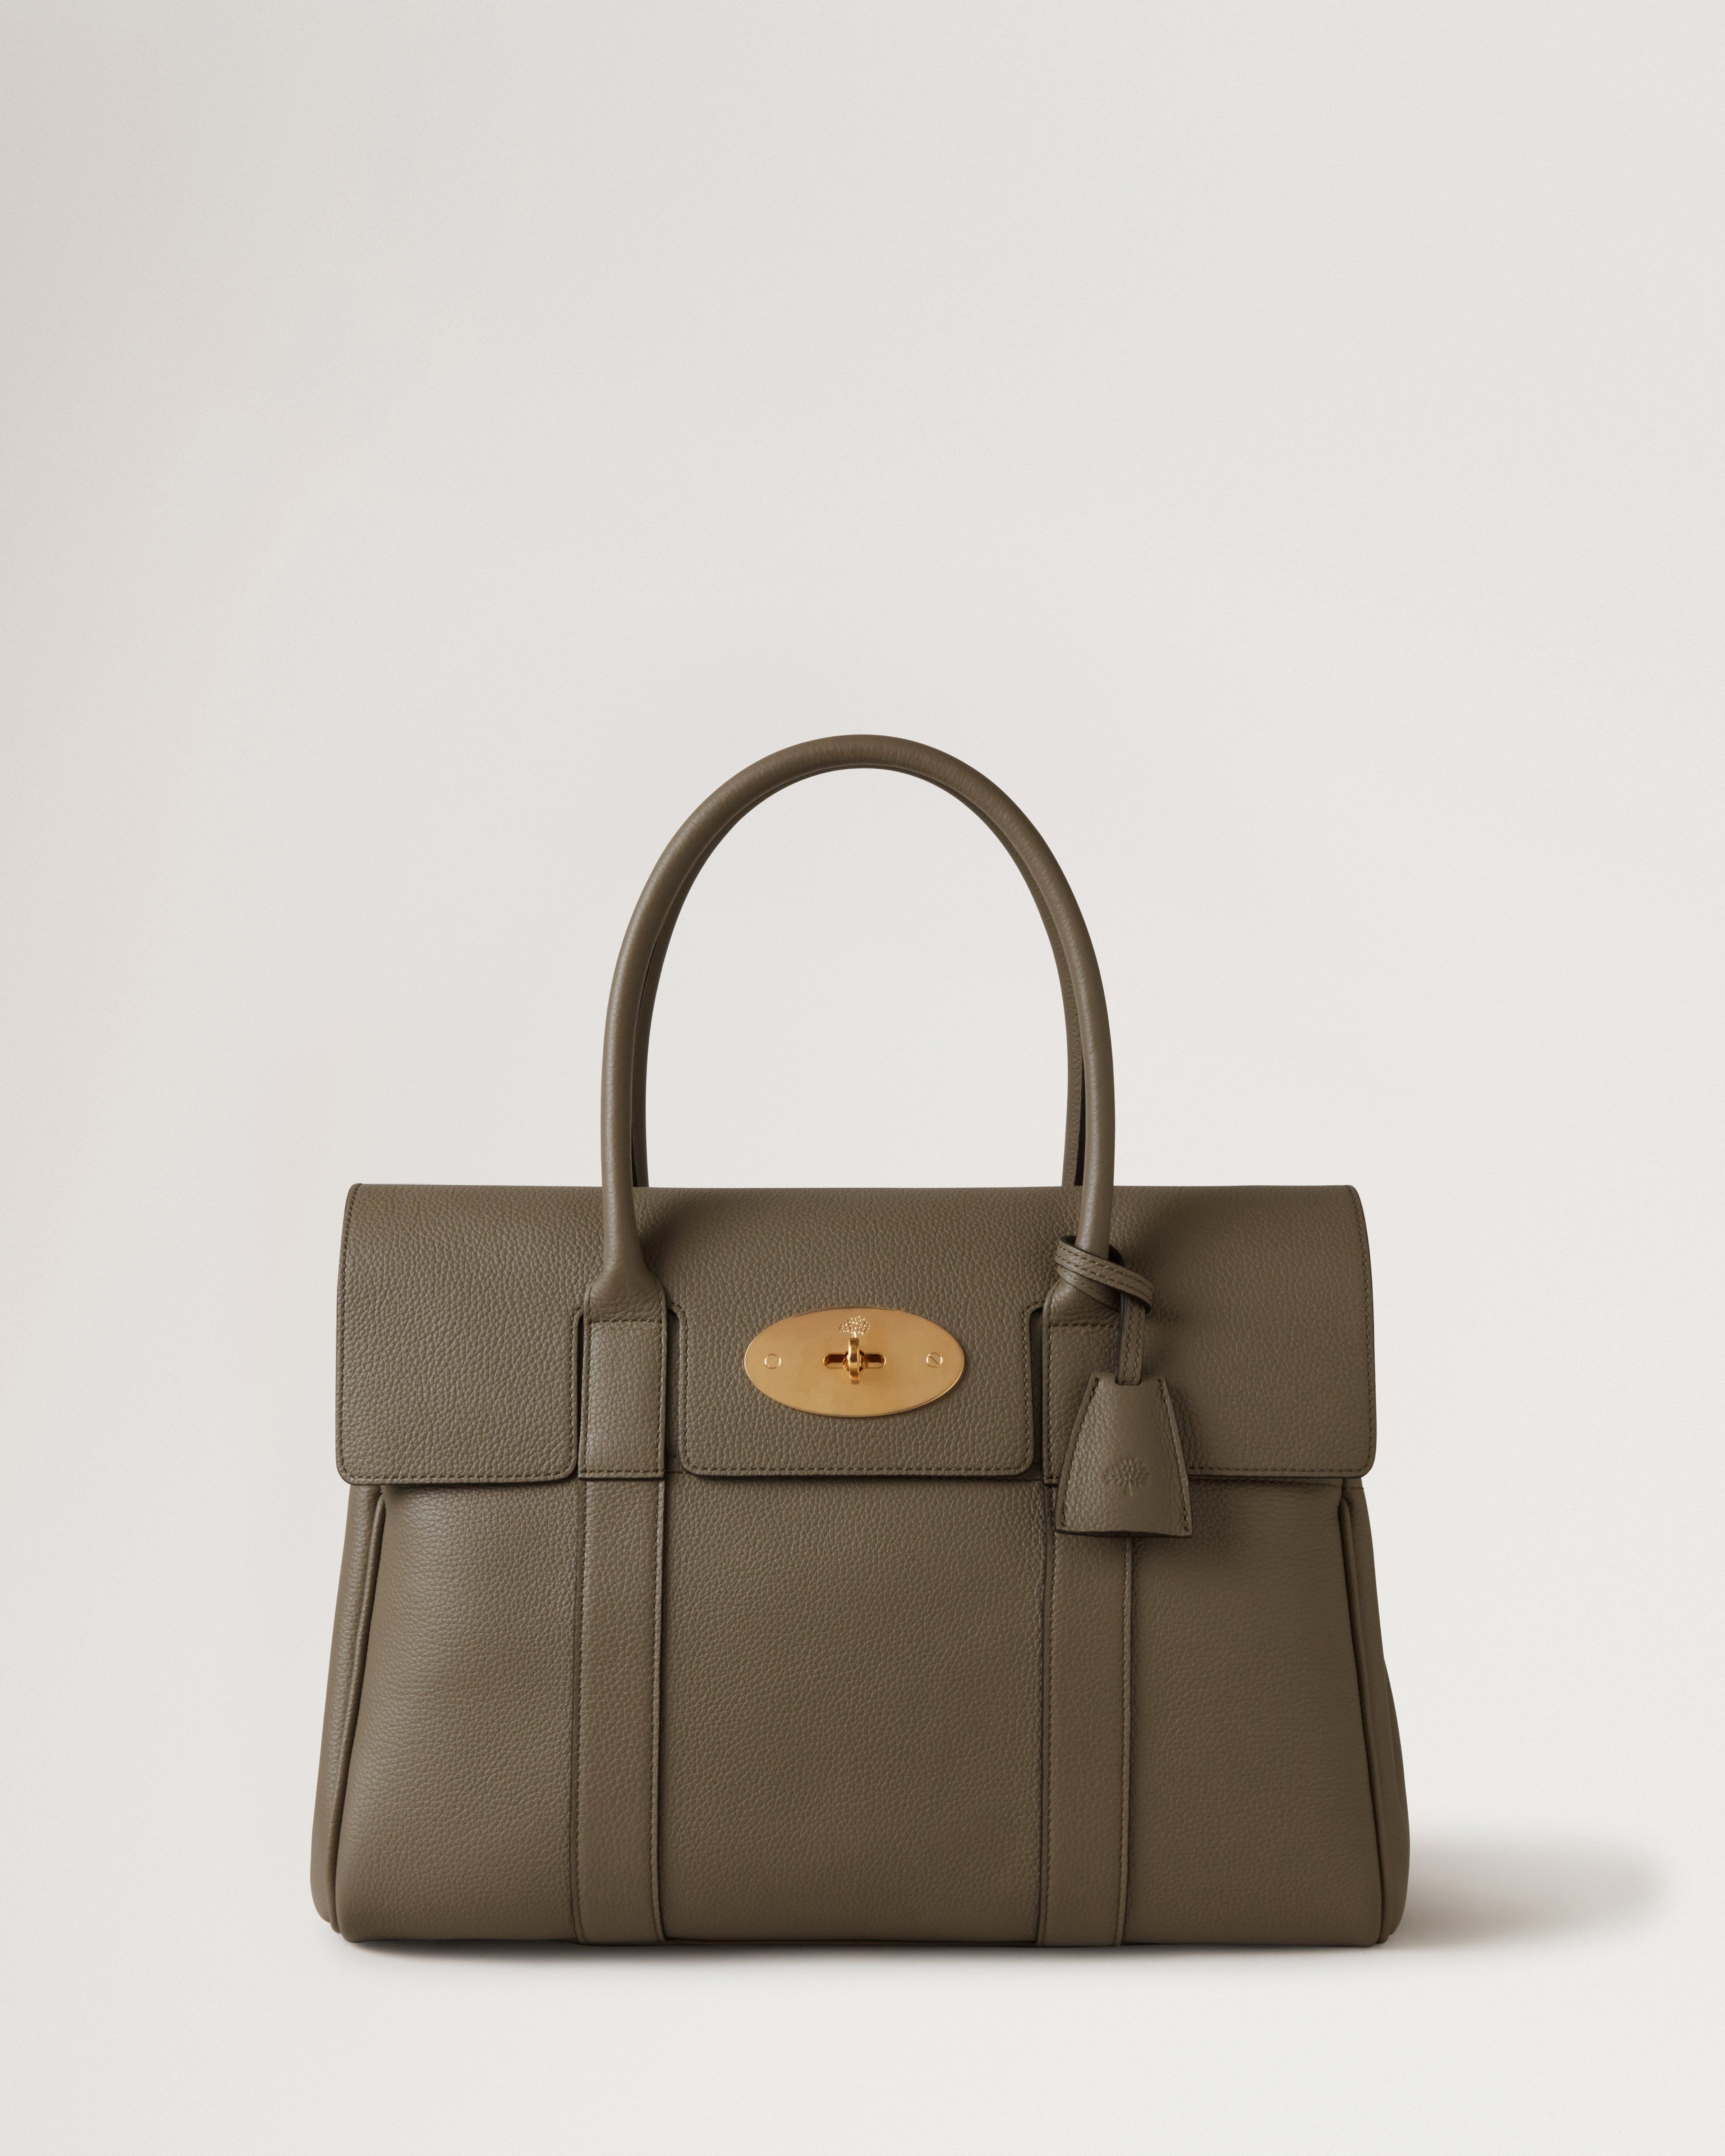 New Arrivals for Women | Designer Bags & Accessories | Mulberry